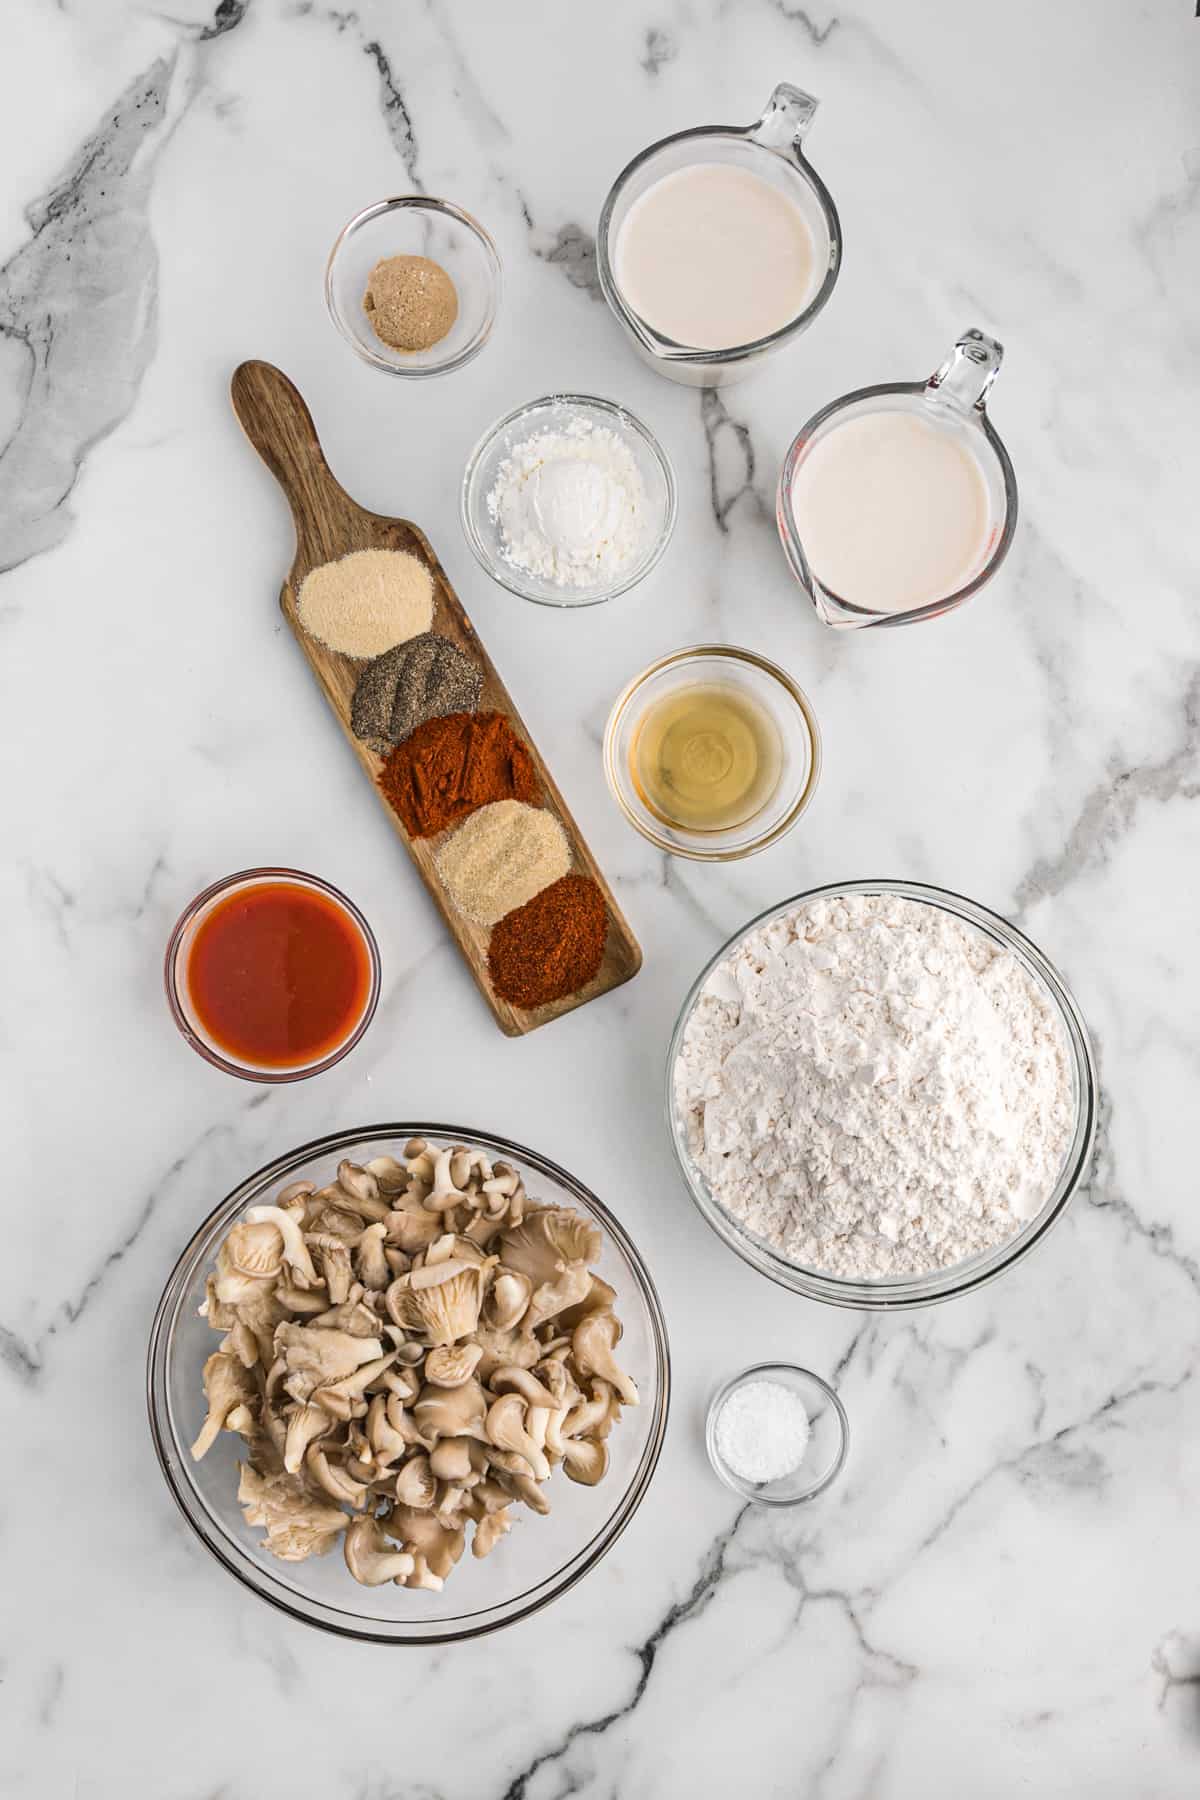 Ingredients to make battered and fried oyster mushrooms in small bowls on a white surface.